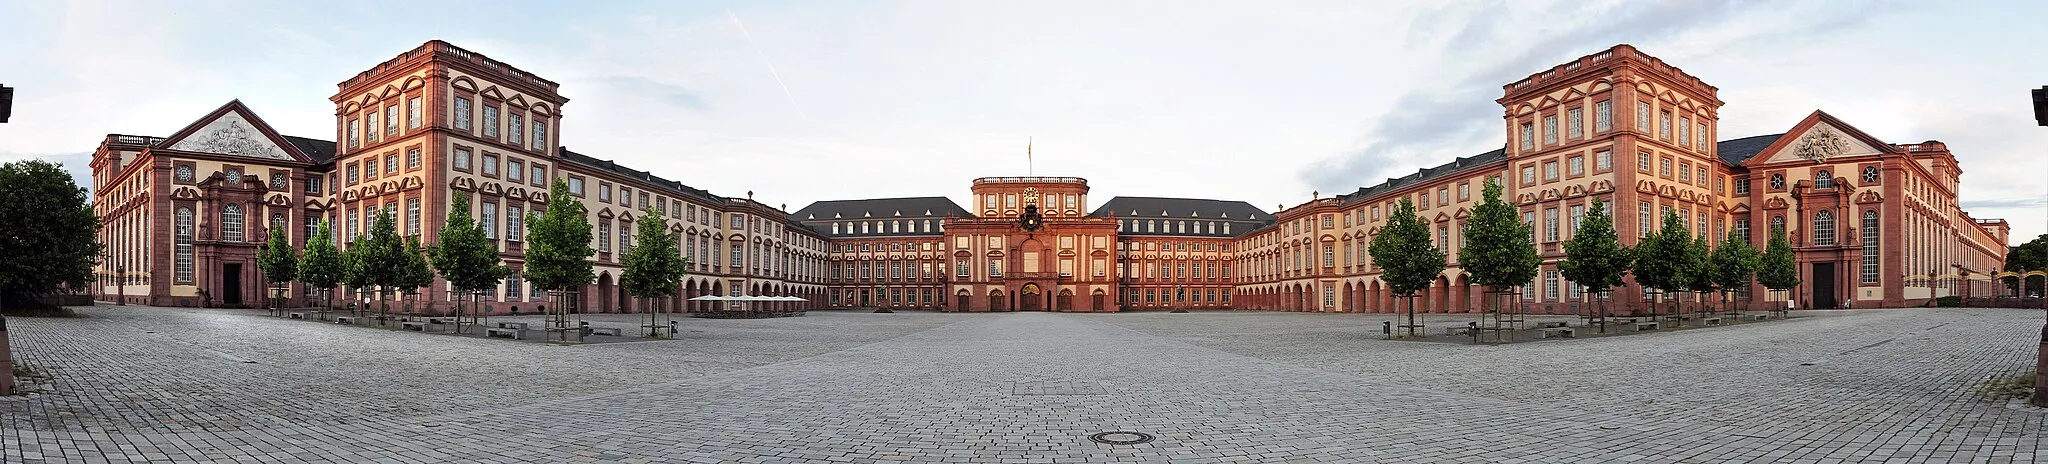 Photo showing: Mannheim Palace, panoramic view, 180 degrees - 5 pictures stitched